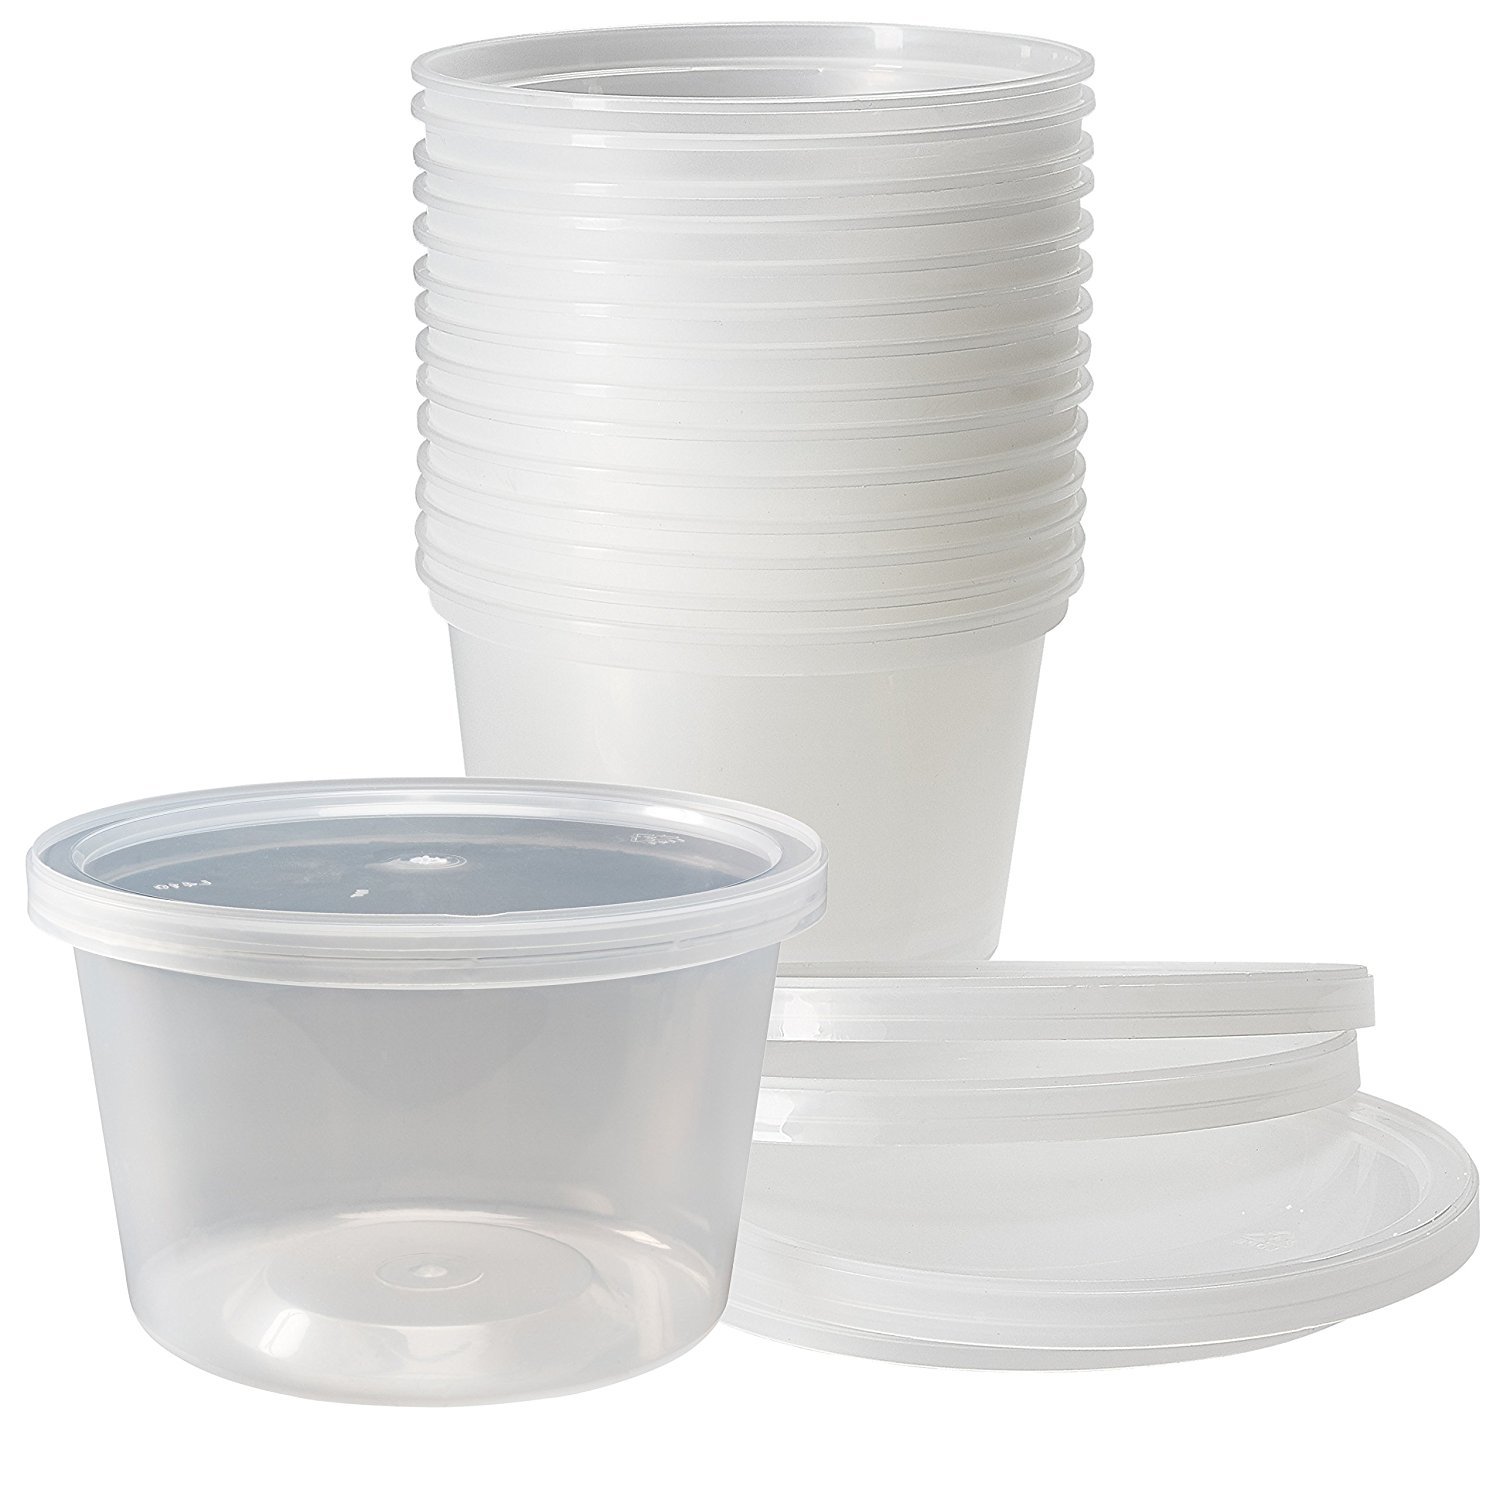 48 x Pint Deli Containers + Lids [Yeast Cake, Yeast Rehydration